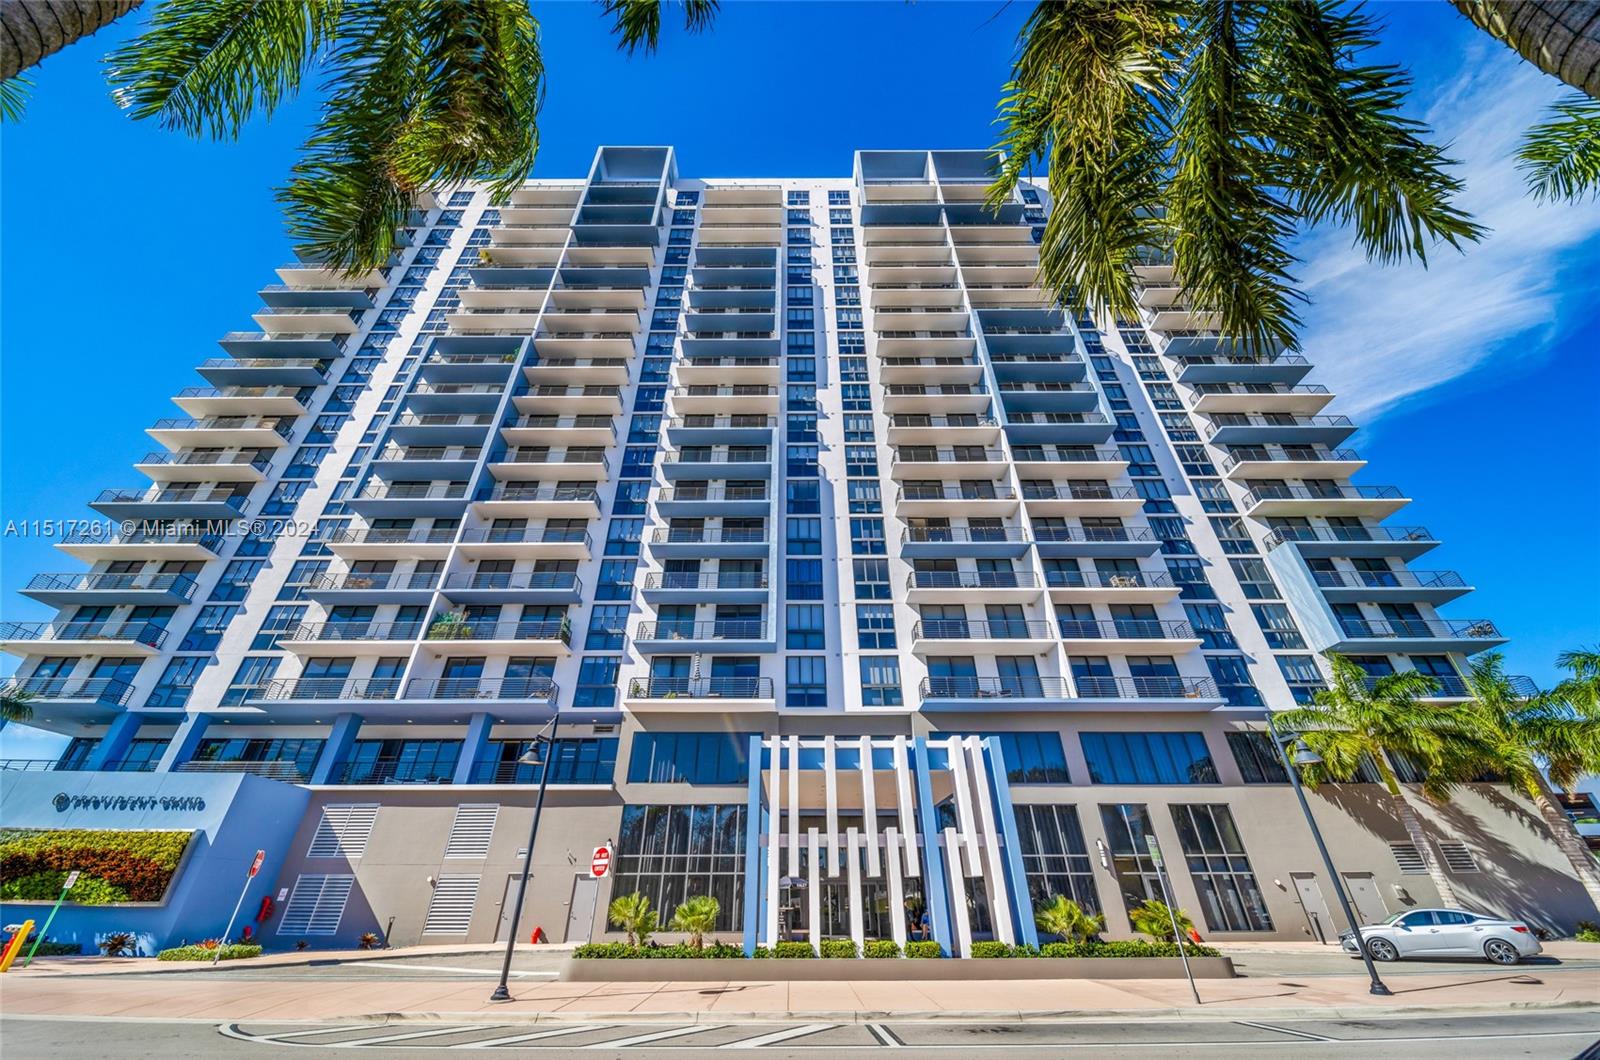 This spectacular 1 bedroom, 1 bathroom condo is located in the heart of Downtown Doral. It features a modern kitchen with quartz countertops and backsplash, stainless steel appliances, dishwasher, and garbage disposal. The condo boasts porcelain tile floors throughout. Large walk-in closet and amazing views of the park and city. It is equipped with impact windows for safety and noise reduction. The building amenities are fantastic, including a pool, sauna, massage room, fitness center, kids playroom, valet parking, and more. Living in this condo provides a luxurious lifestyle. The location is excellent, with close proximity to A+ schools, restaurants, shopping centers, and supermarkets. It is only 15 minutes away from Miami International Airport.